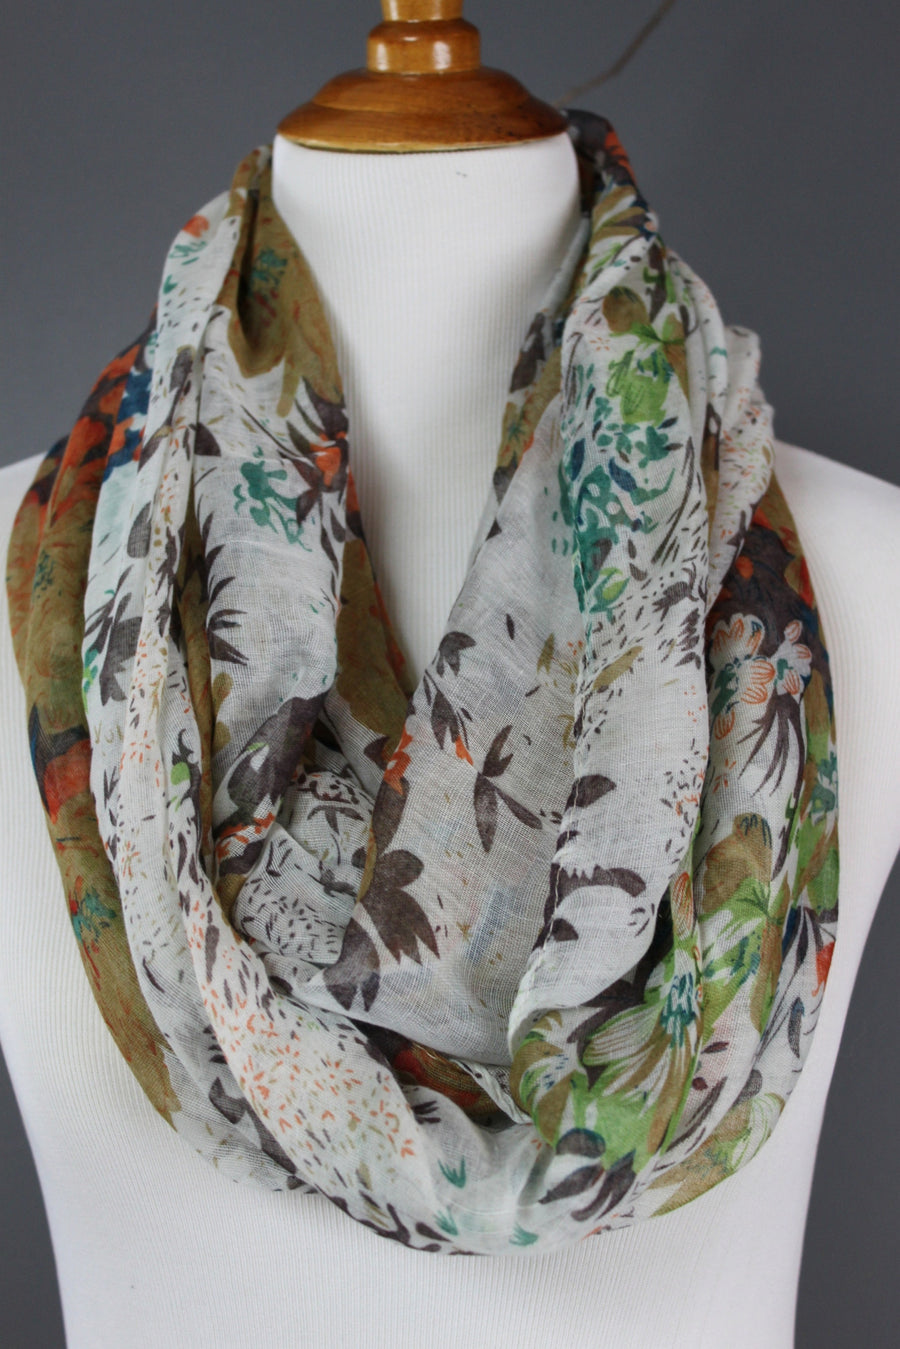 Enchanted Forest - Floral Print Infinity Scarf